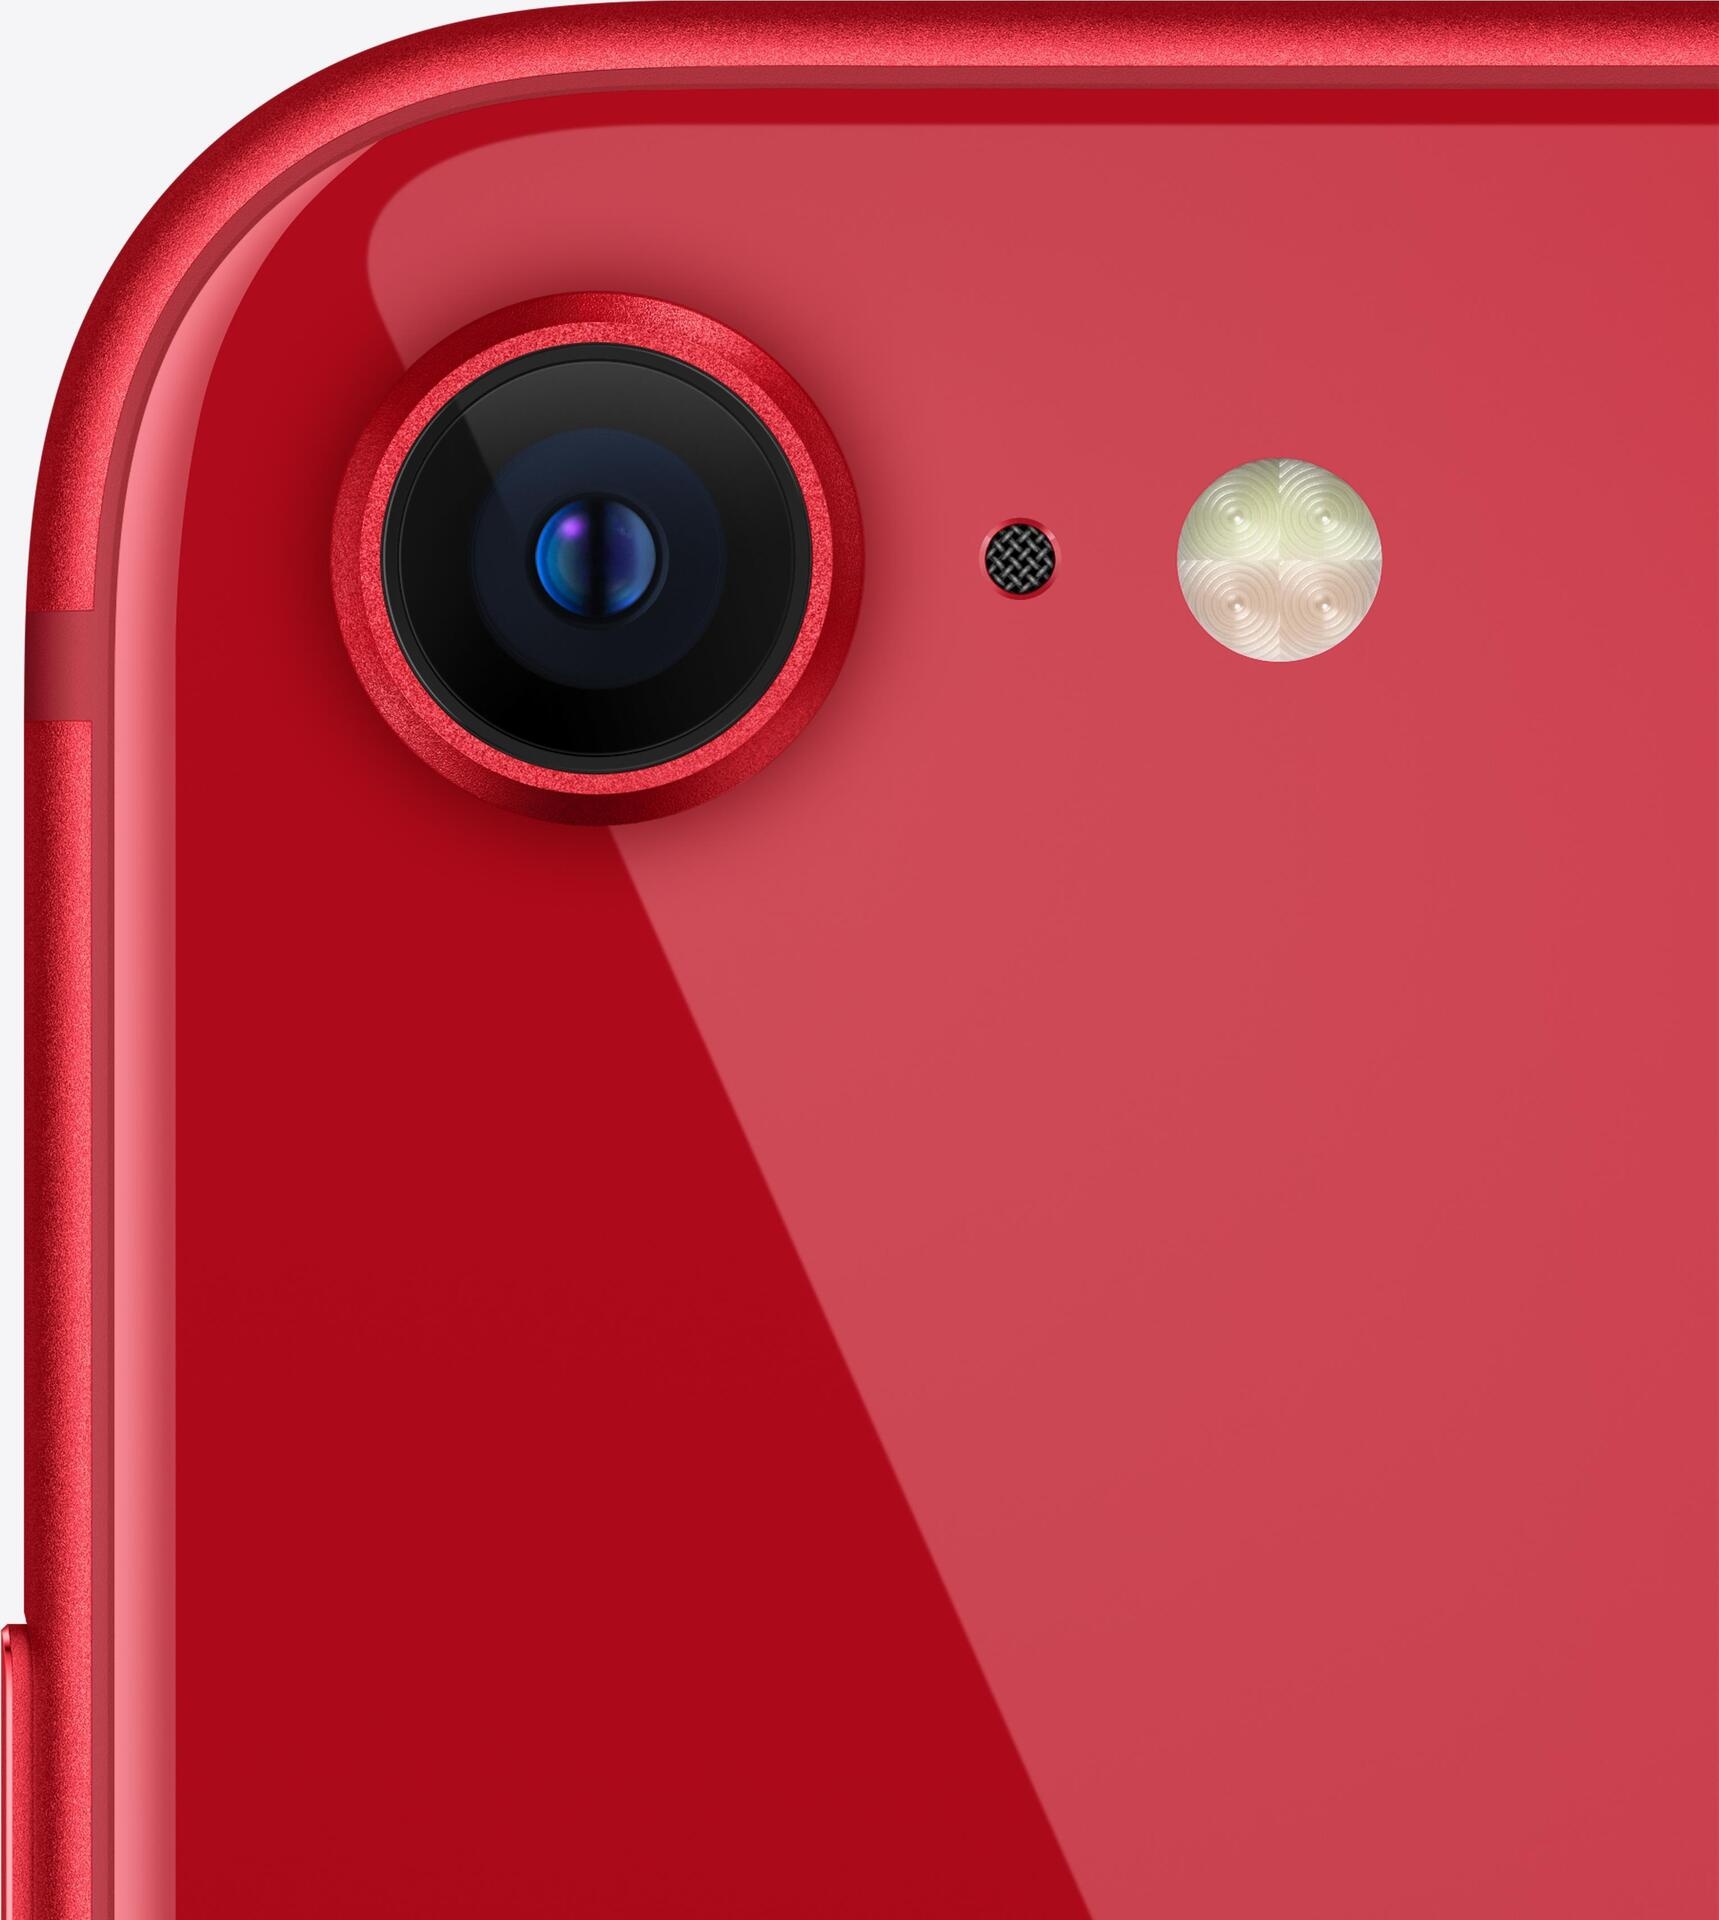 Apple iPhone SE (3rd generation) - (PRODUCT) RED - 5G Smartphone - Dual-SIM - 256GB - LCD-Anzeige - 4.7" - 1334 x 750 Pixel - rear camera 12 MP - front camera 7 MP - Rot (MMXP3ZD/A)